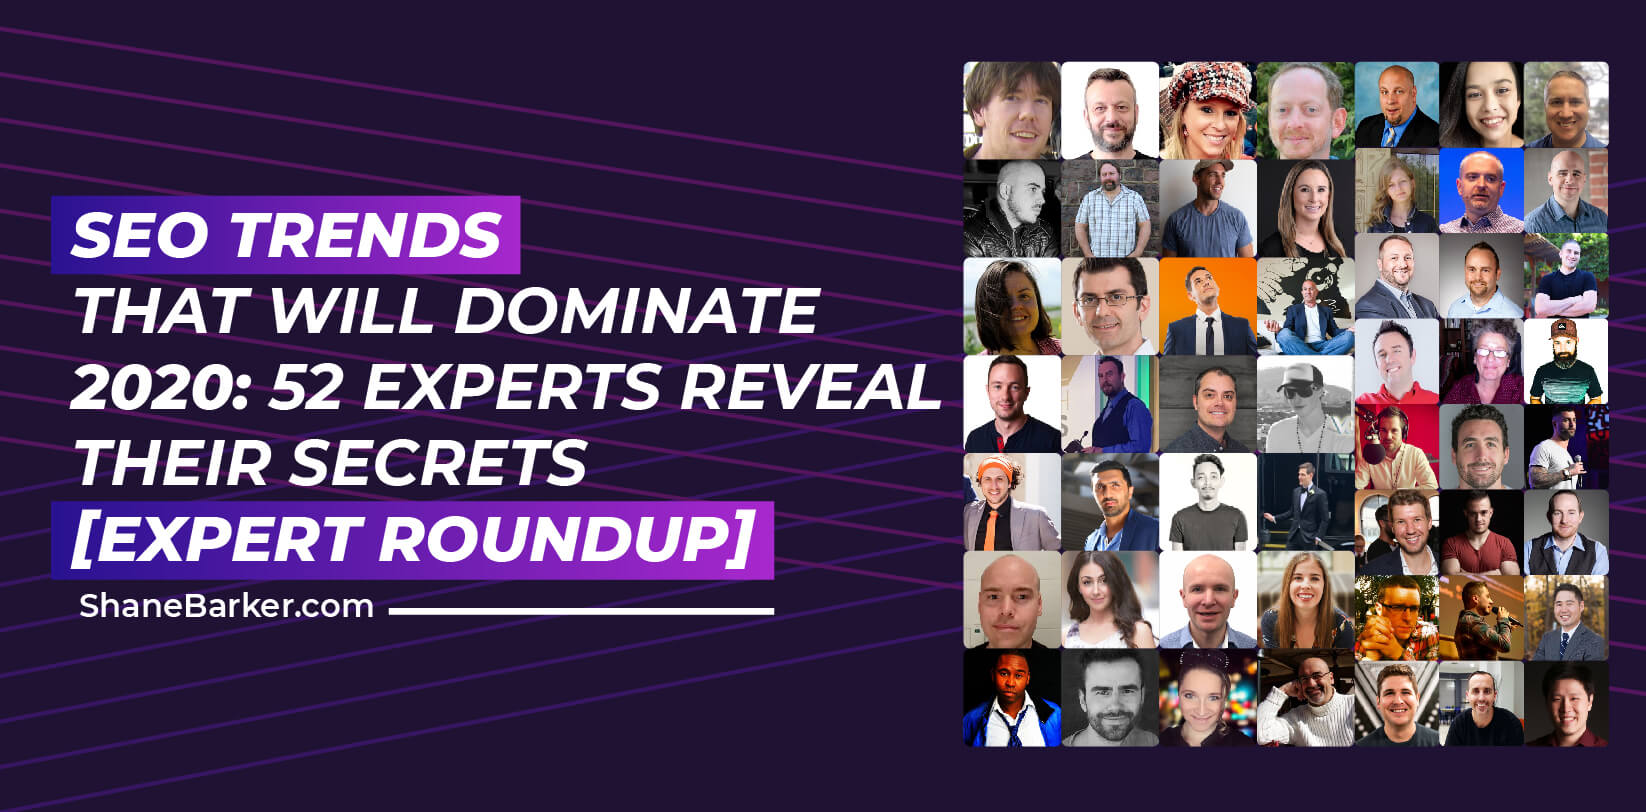 SEO Trends That Will Dominate 2020 52 Experts Reveal Their Secrets